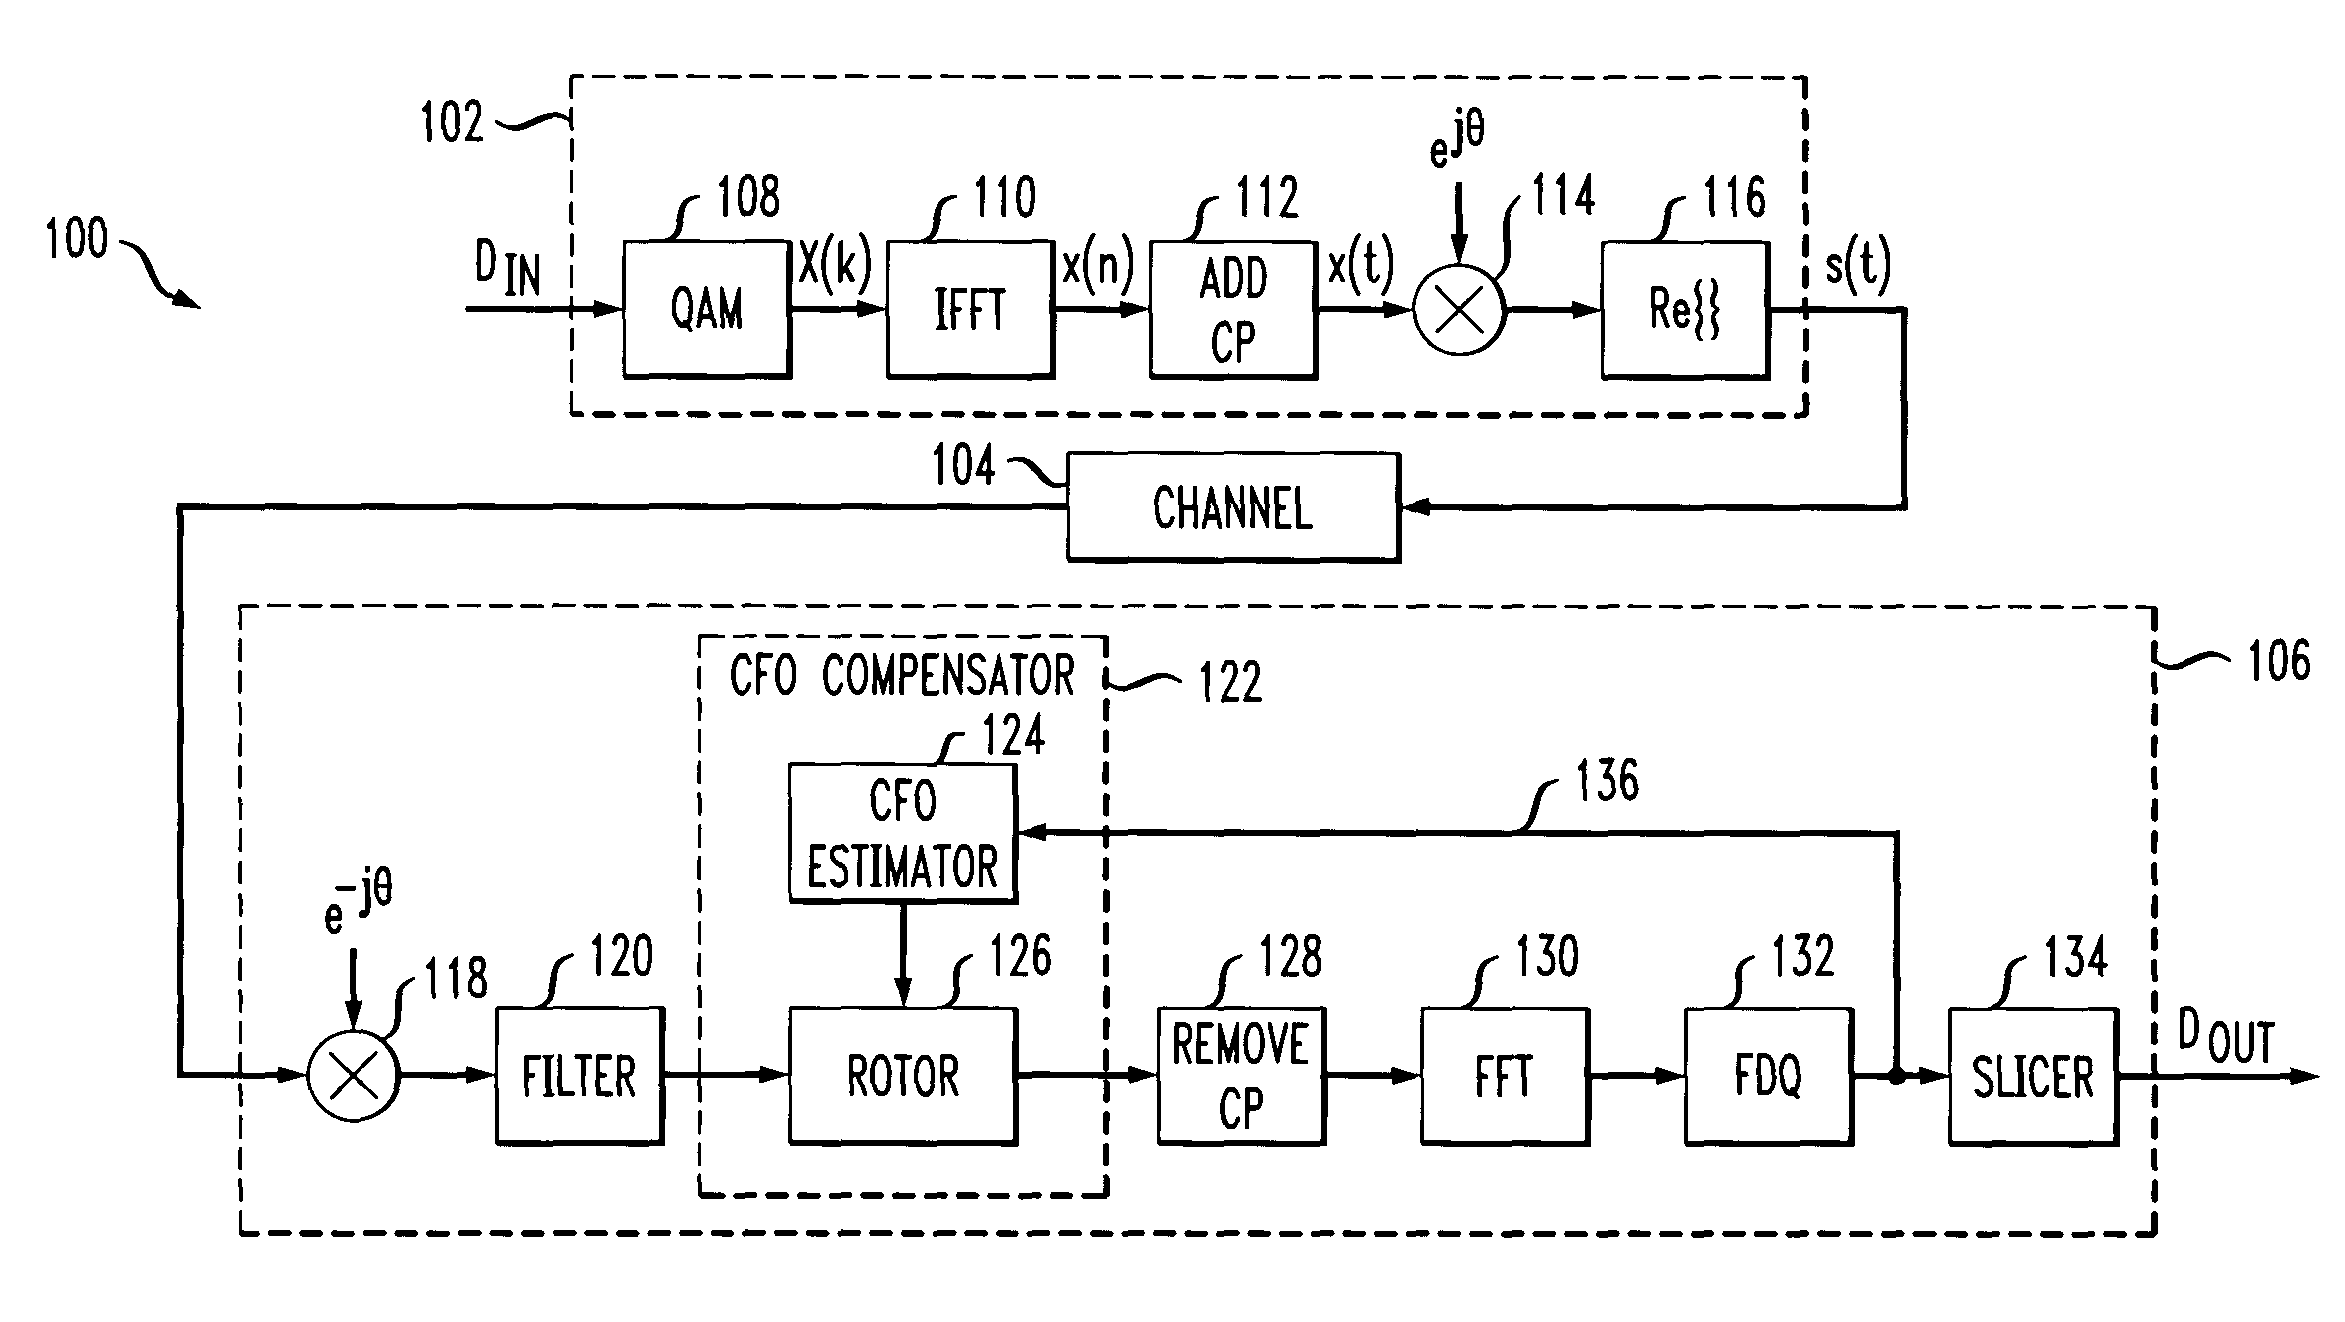 Carrier frequency offset estimation in a wireless communication system